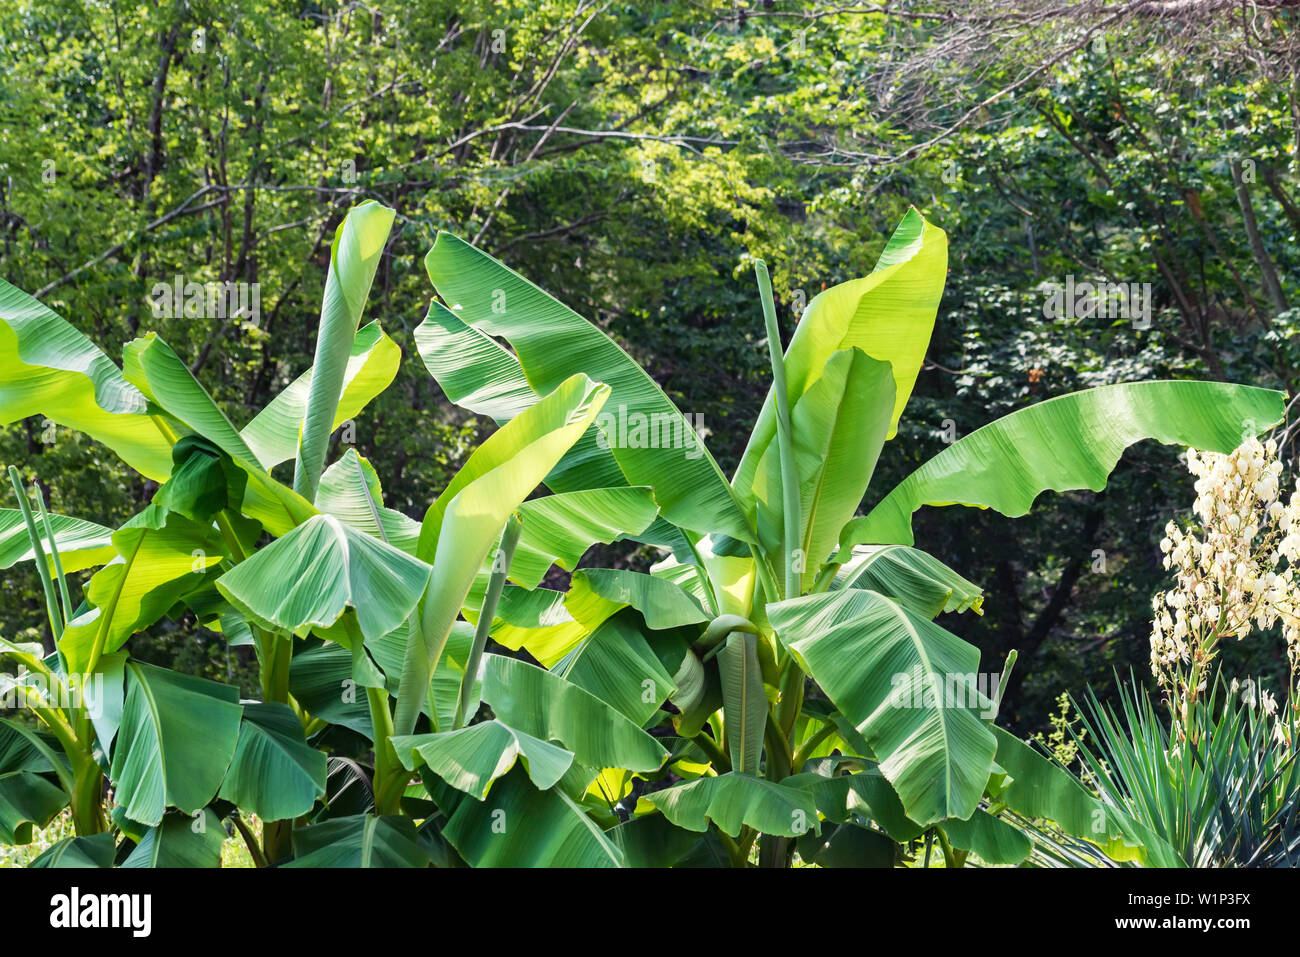 Close up green leaves of banana tree growinf in park Stock Photo